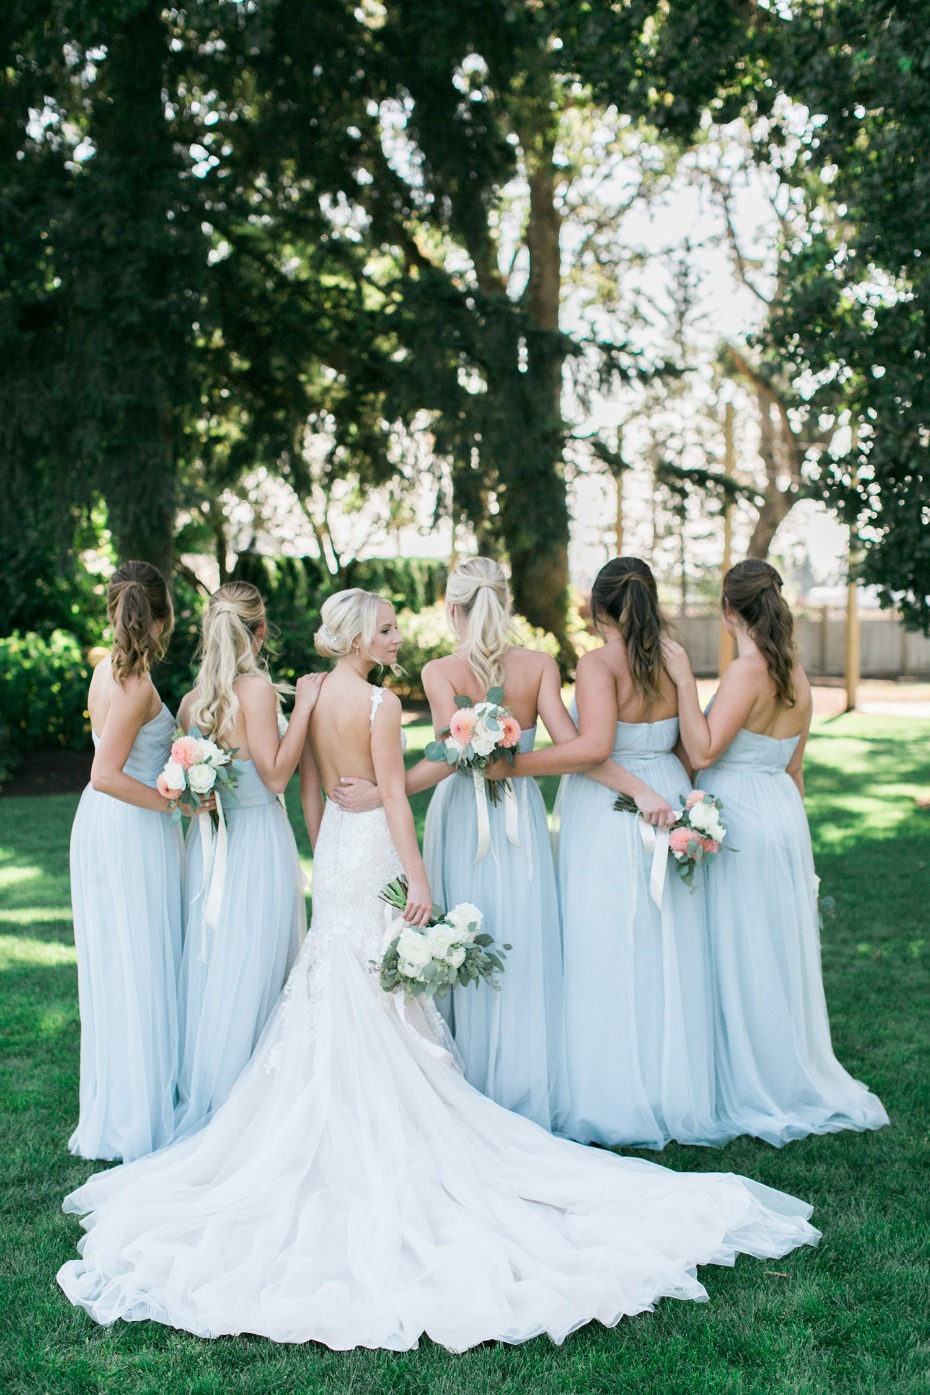 Bridesmaids in matching blue gowns